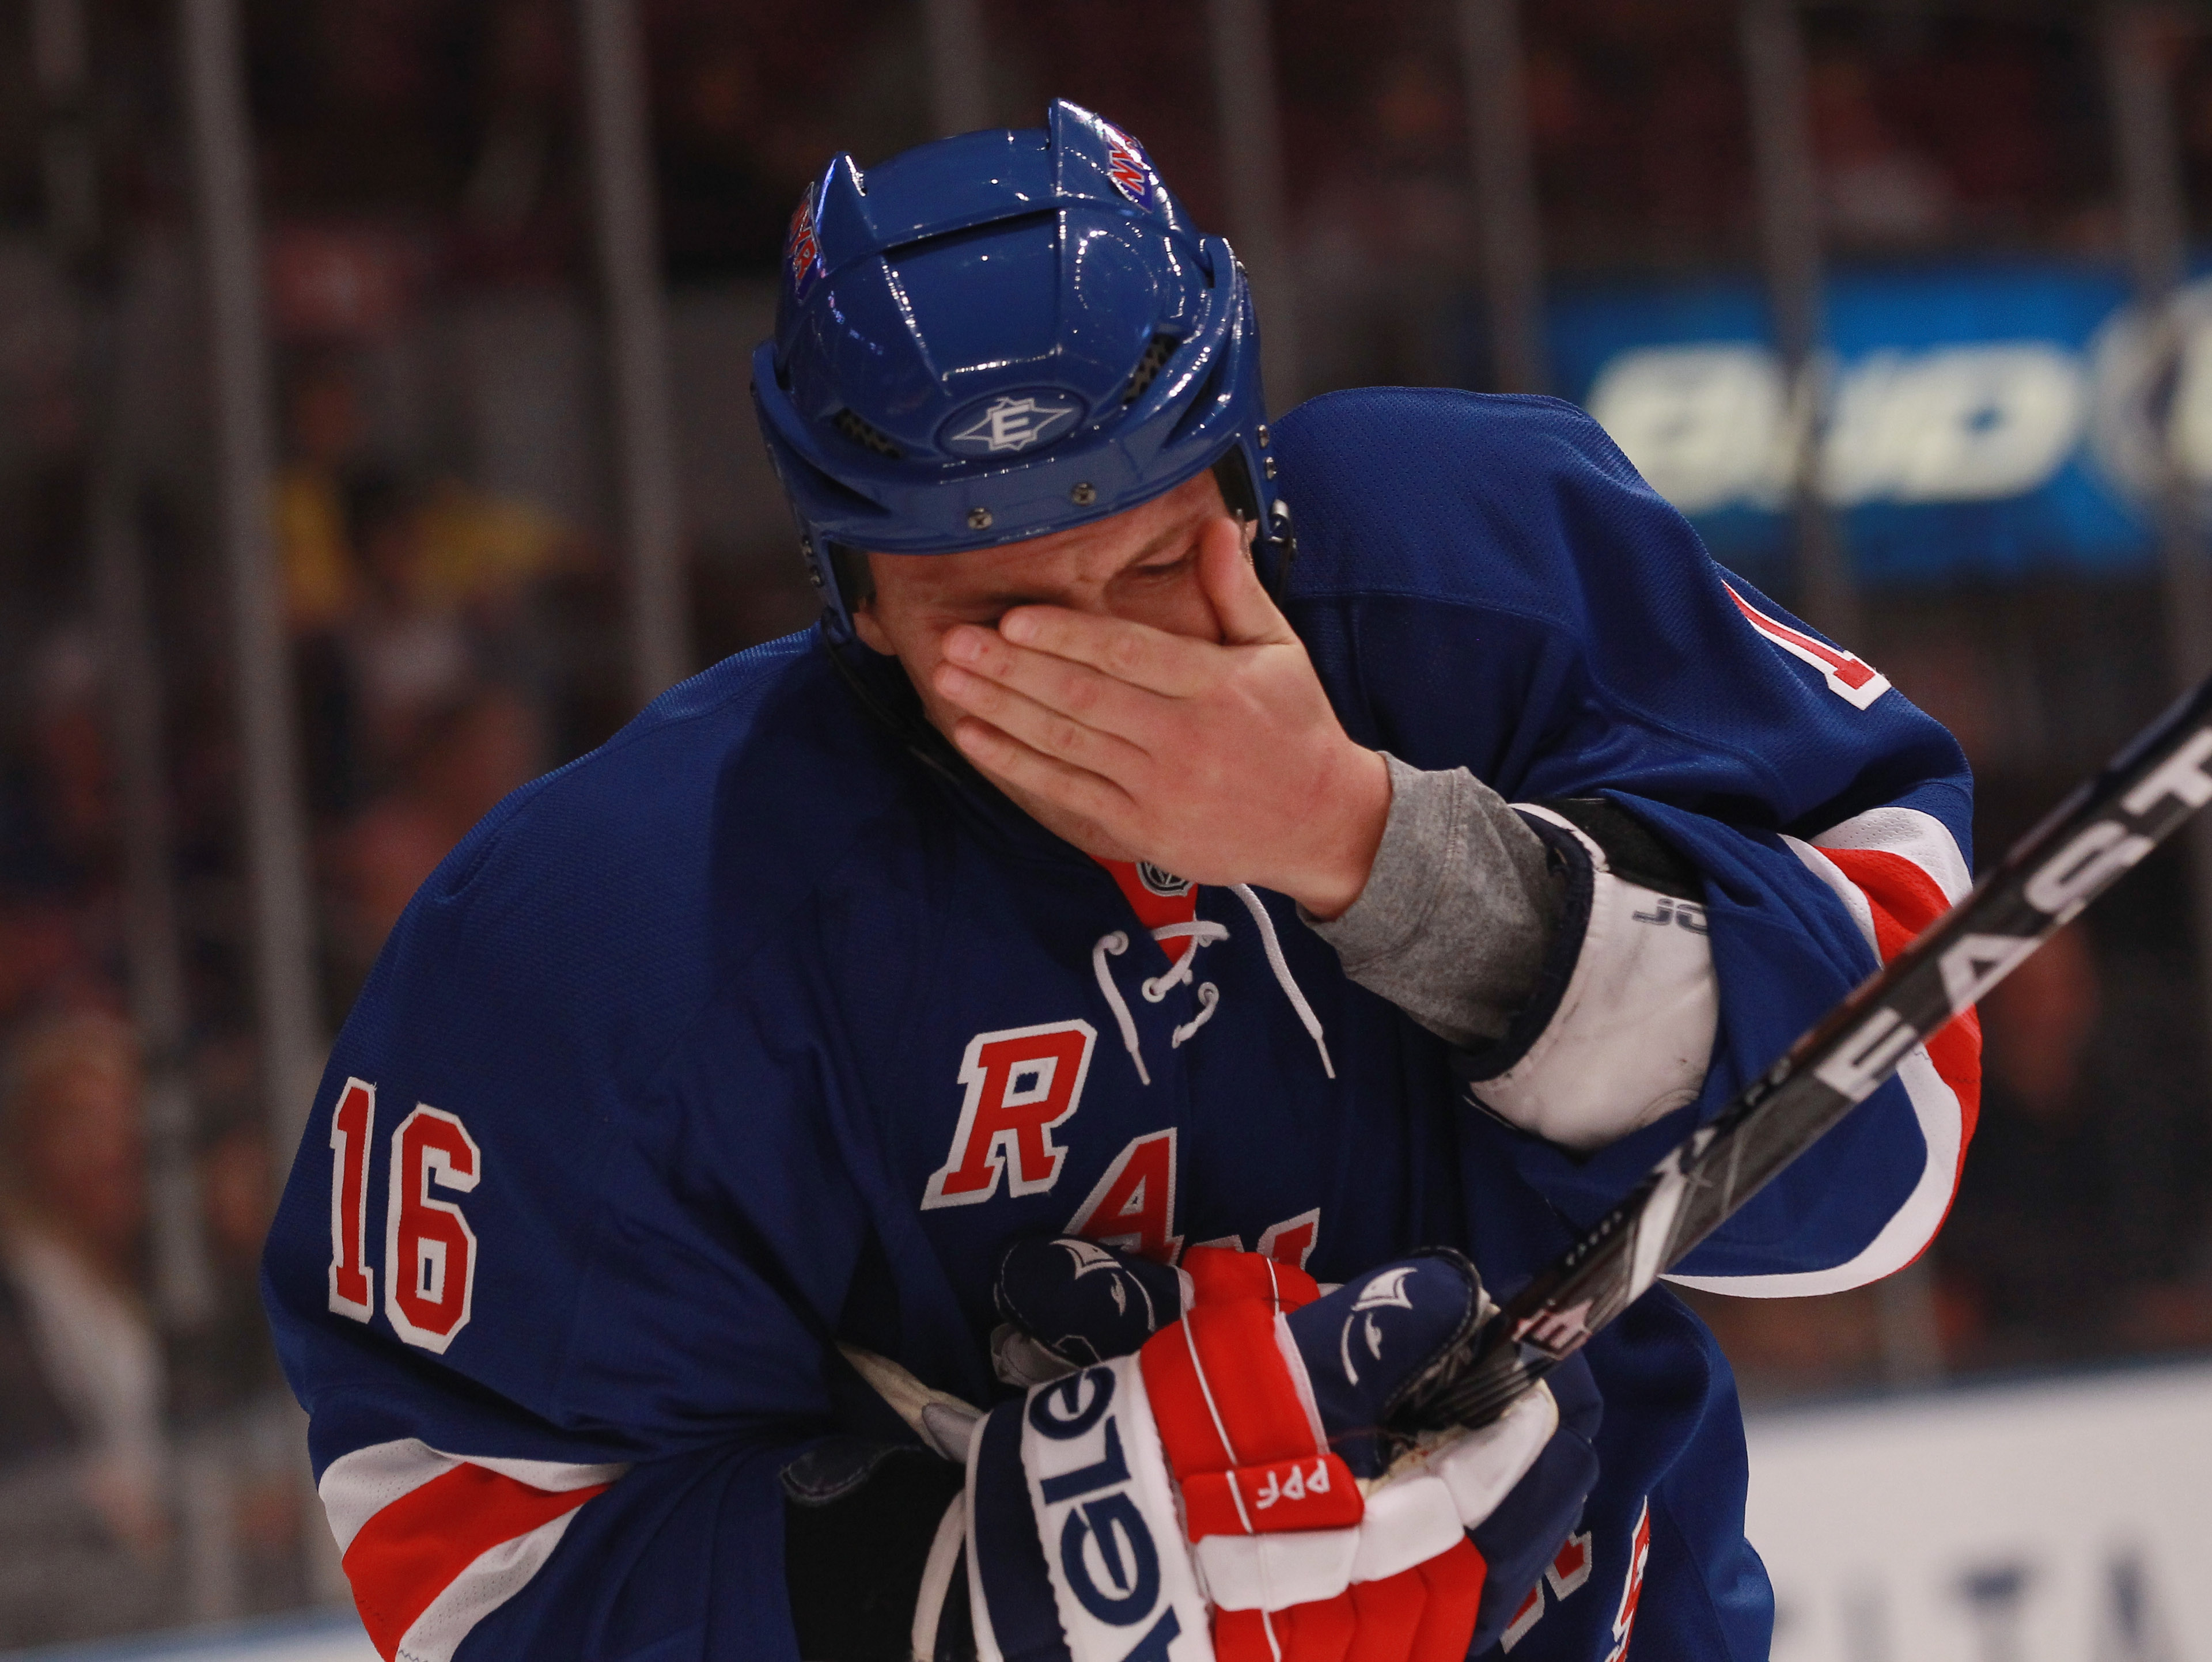 NEW YORK - SEPTEMBER 29: Sean Avery #16 of the New York Rangers checks for further injury after being hit by a stick in his game against the Detroit Red Wings at Madison Square Garden on September 29, 2010 in New York City. (Photo by Bruce Bennett/Getty I